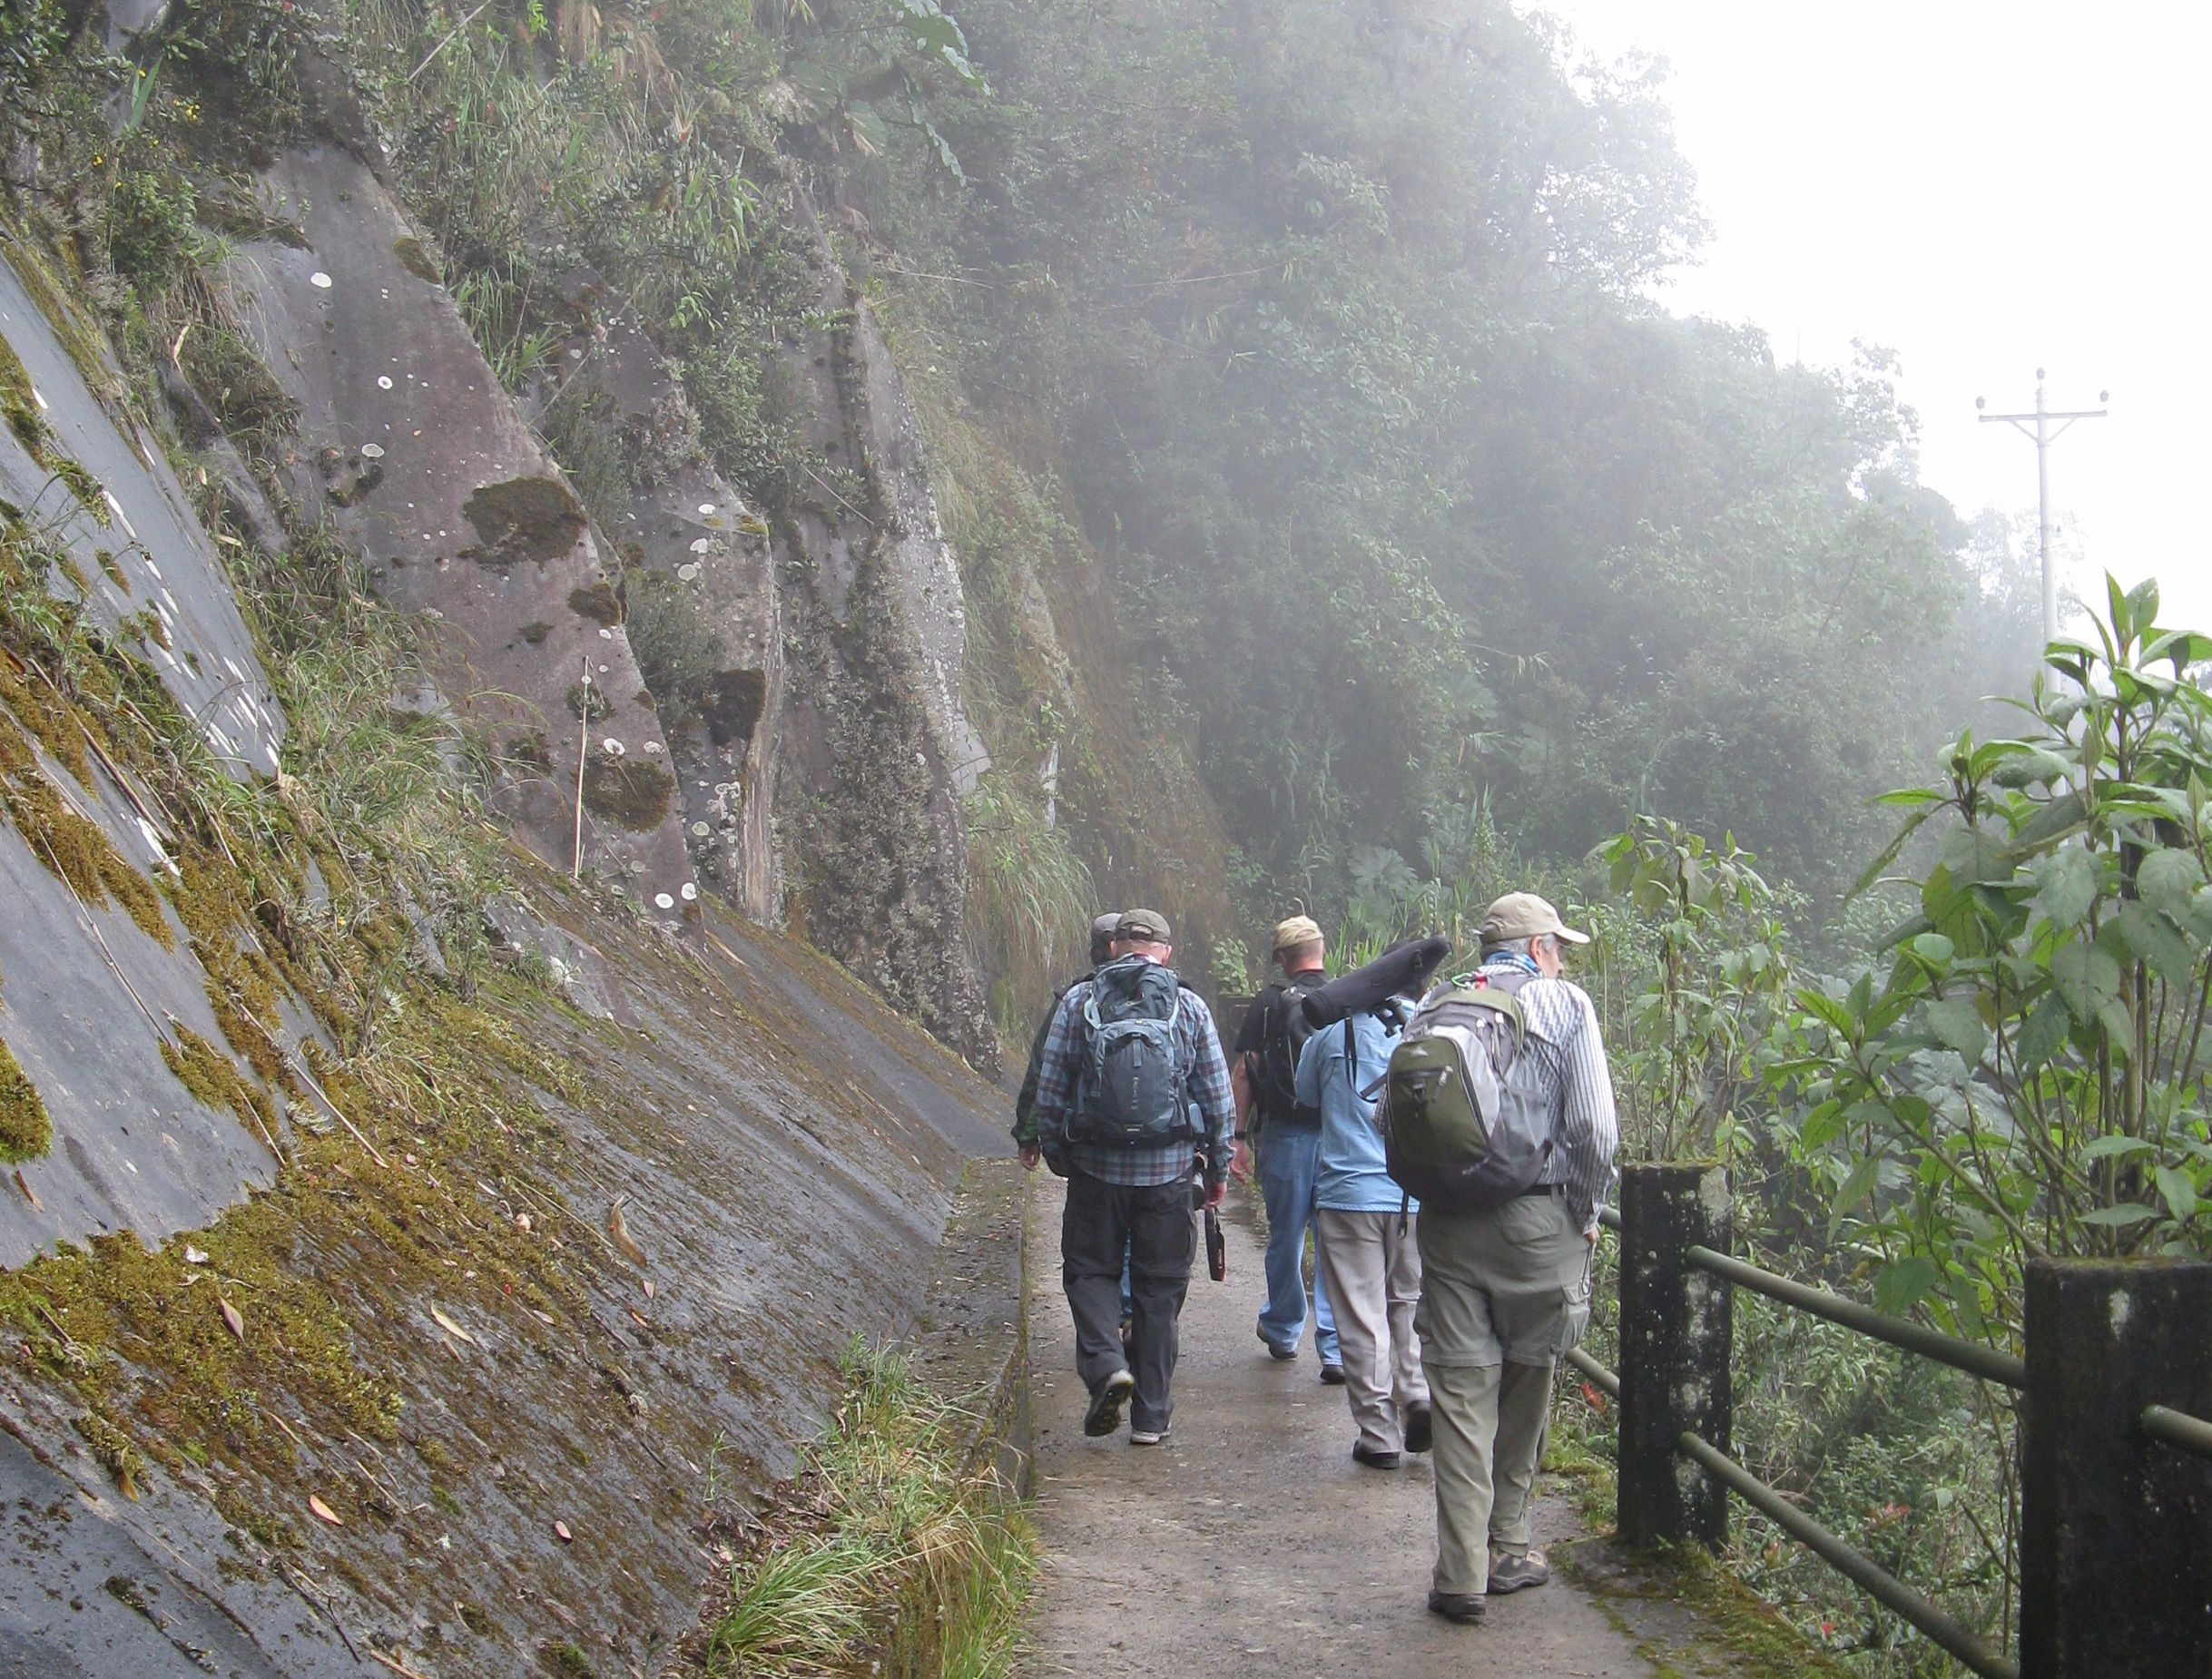 A hike in the Yanacocha Nature Reserve.